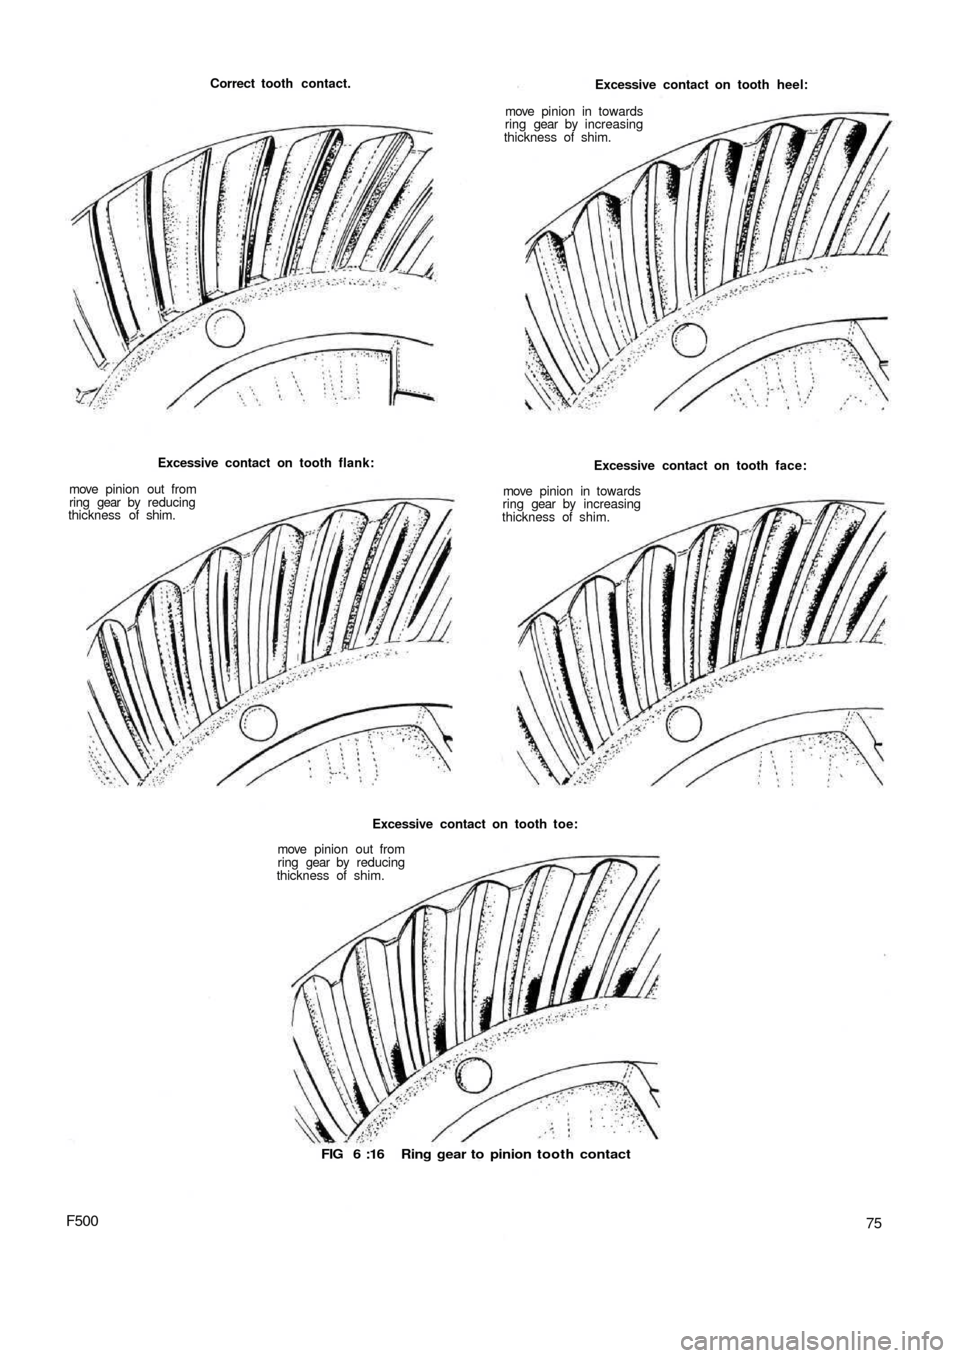 FIAT 500 1970 1.G Repair Manual Correct tooth contact.
Excessive contact on tooth flank:
move  pinion out from
ring gear  by  reducing
thickness of shim.
Excessive contact on tooth toe:
move  pinion out from
ring gear by reducing
th